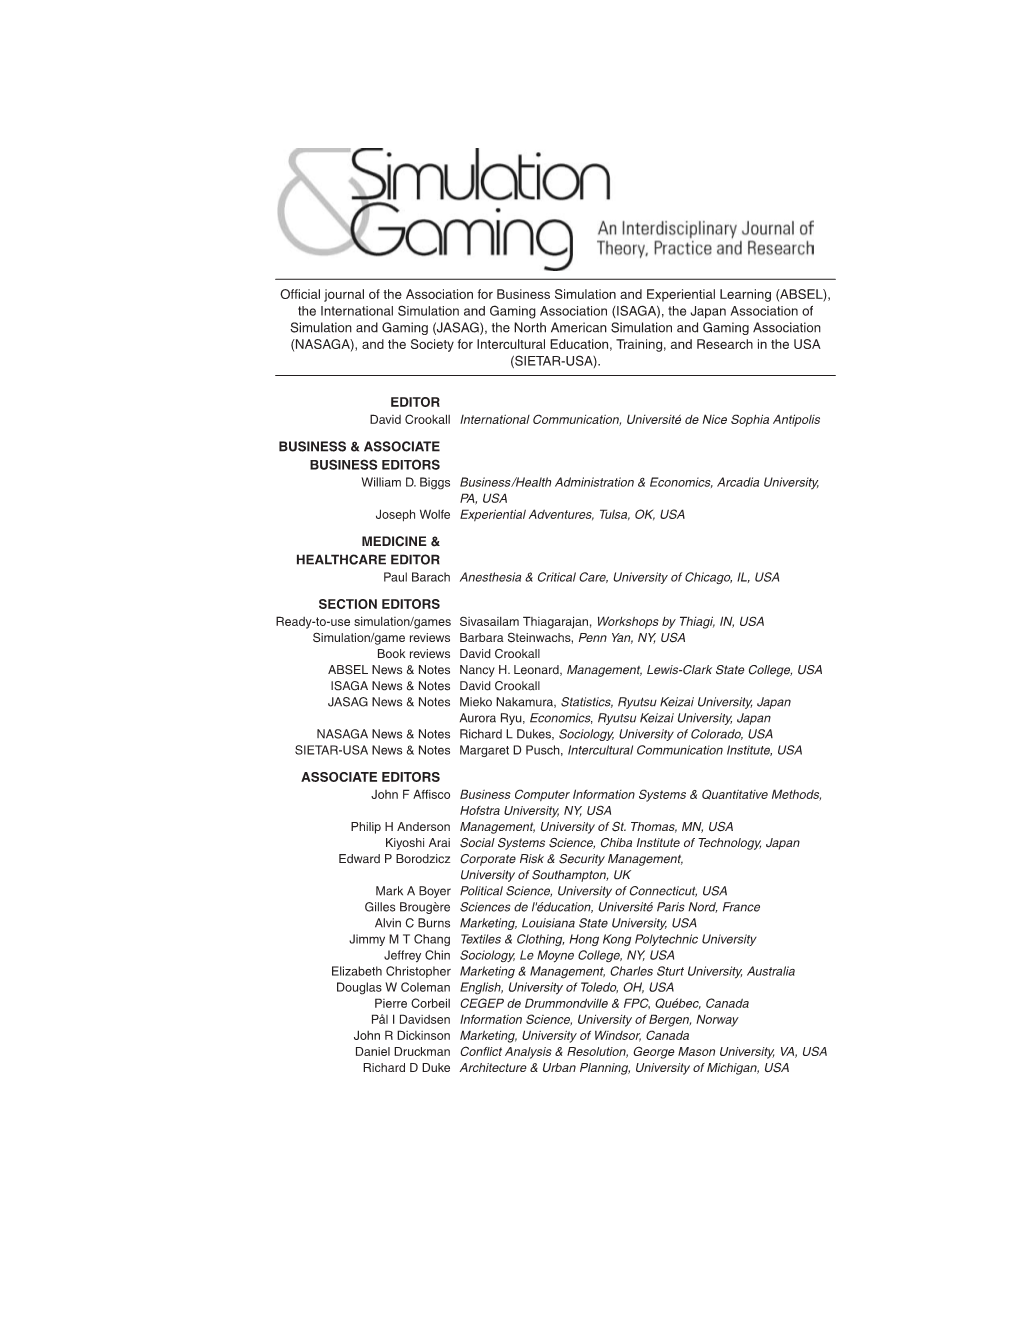 Official Journal of the Association for Business Simulation And